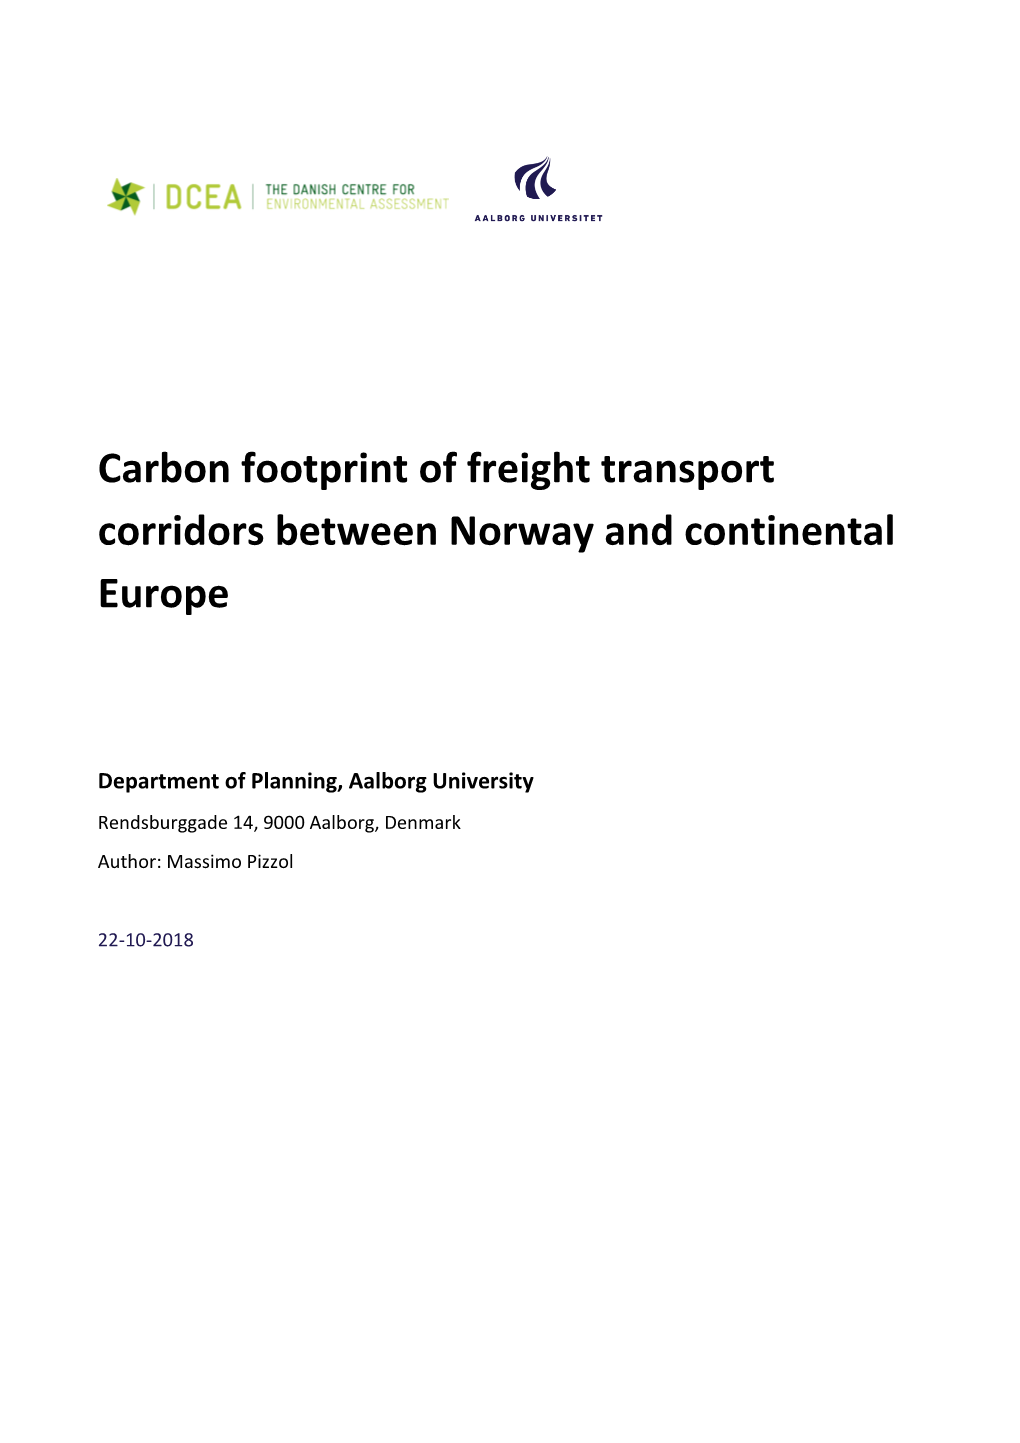 Carbon Footprint of Freight Transport Corridors Between Norway and Continental Europe